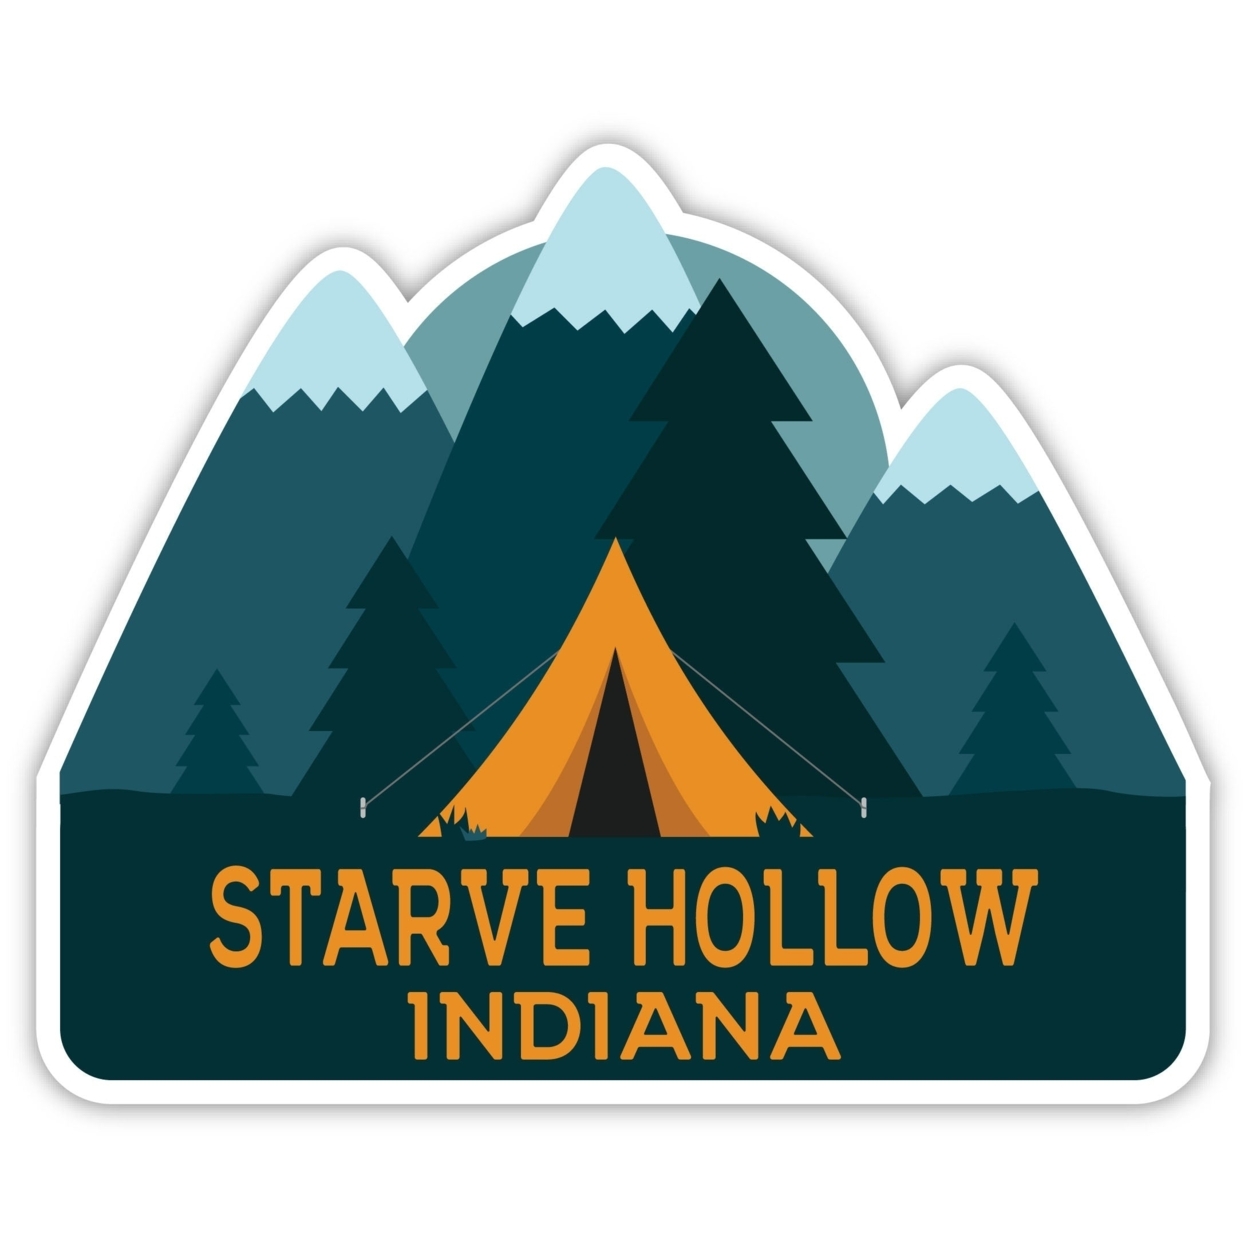 Starve Hollow Indiana Souvenir Decorative Stickers (Choose Theme And Size) - Single Unit, 2-Inch, Tent